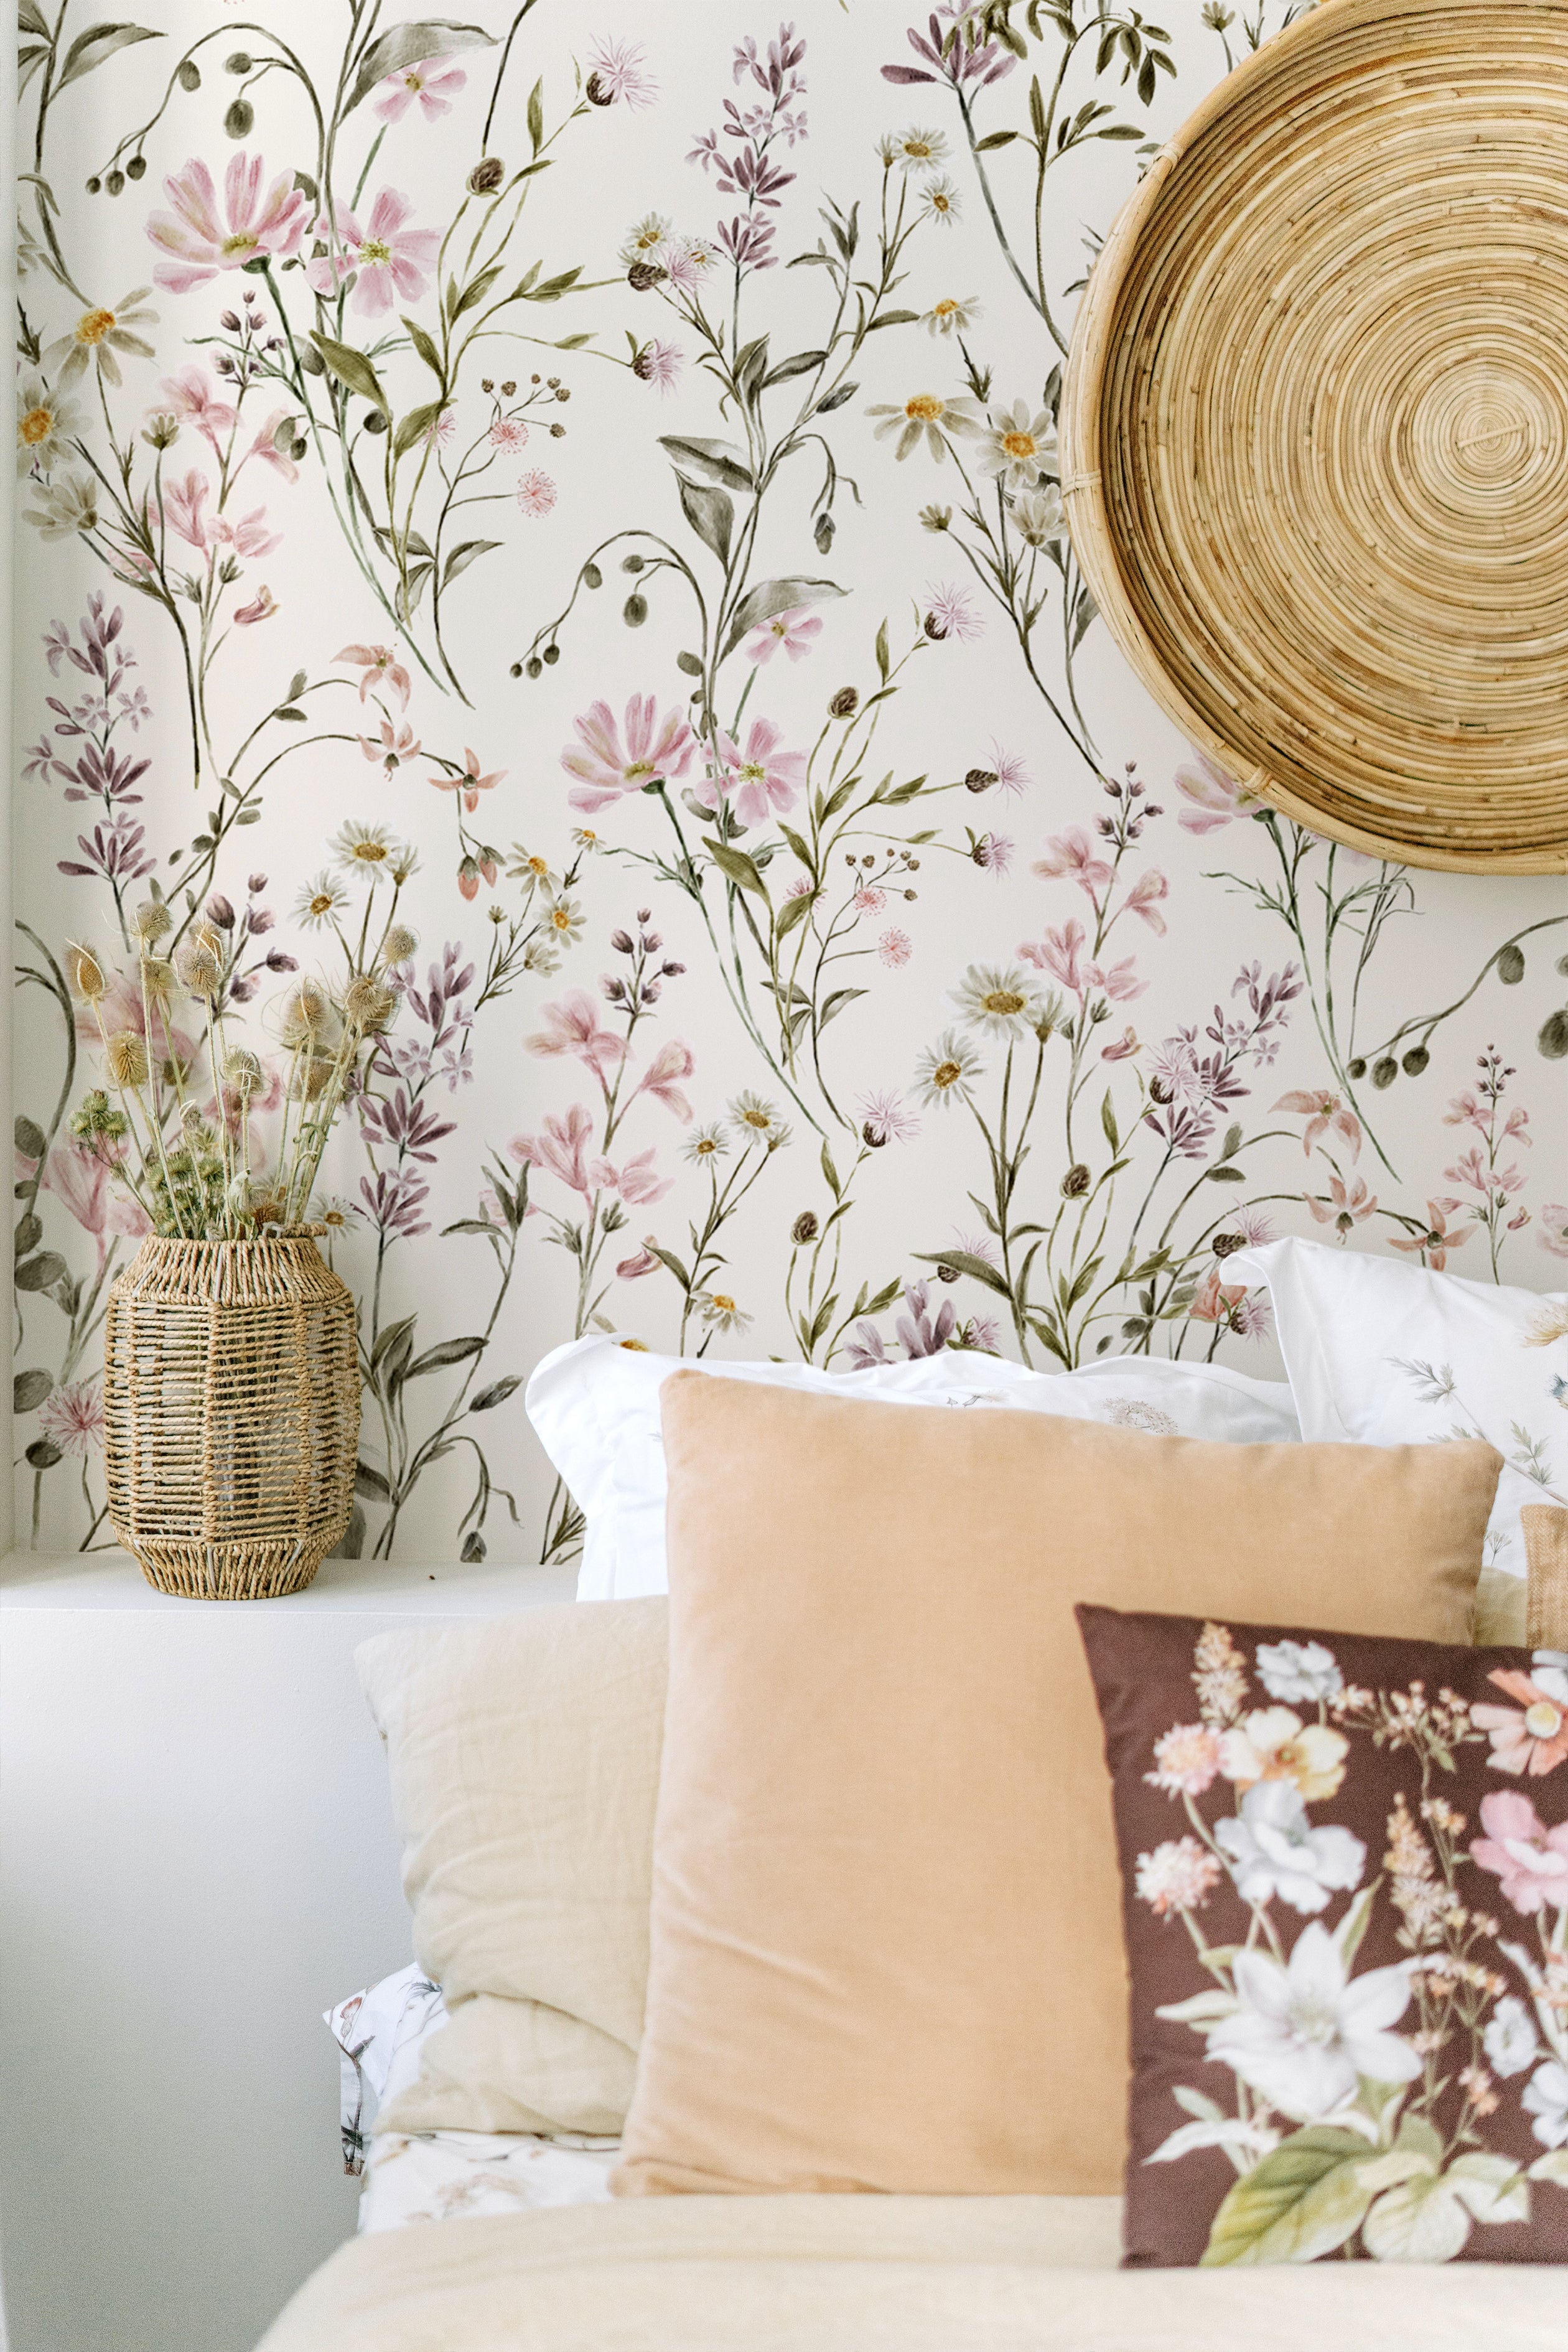 A cozy bedroom corner is brightened by the "WildFloral Wallpaper - 75"," which covers the wall with a beautiful pattern of watercolor wildflowers. The natural theme is complemented by a wicker basket vase, woven wall art, and soft-hued pillows that echo the colors of the florals.